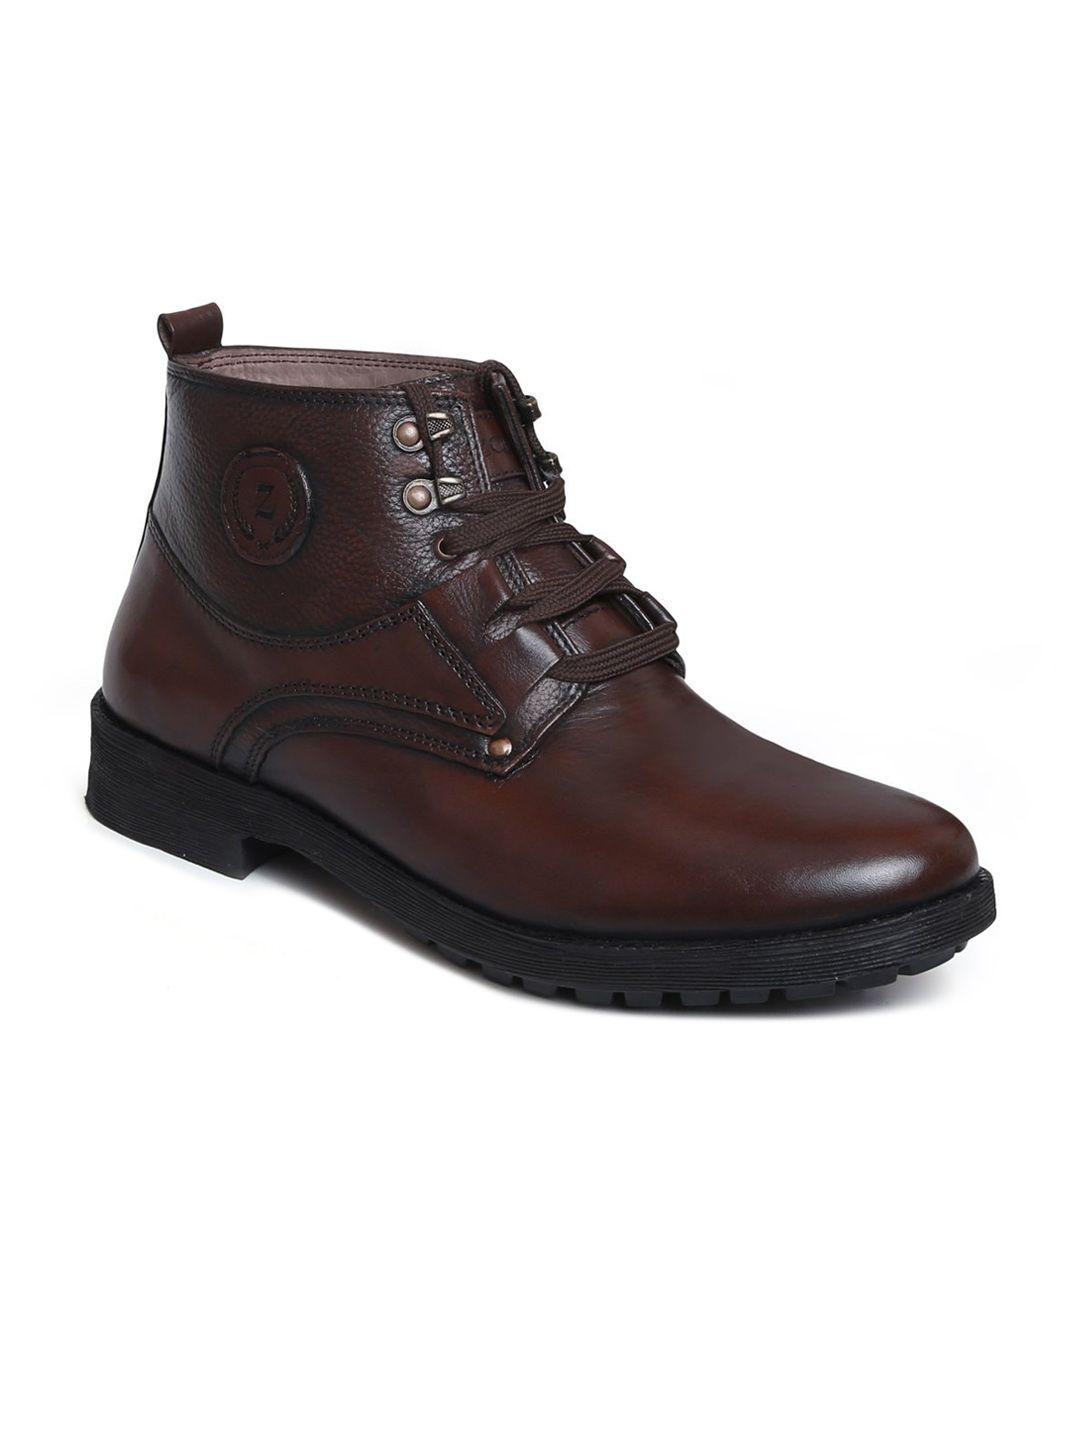 zoom shoes men brown solid leather casual boots